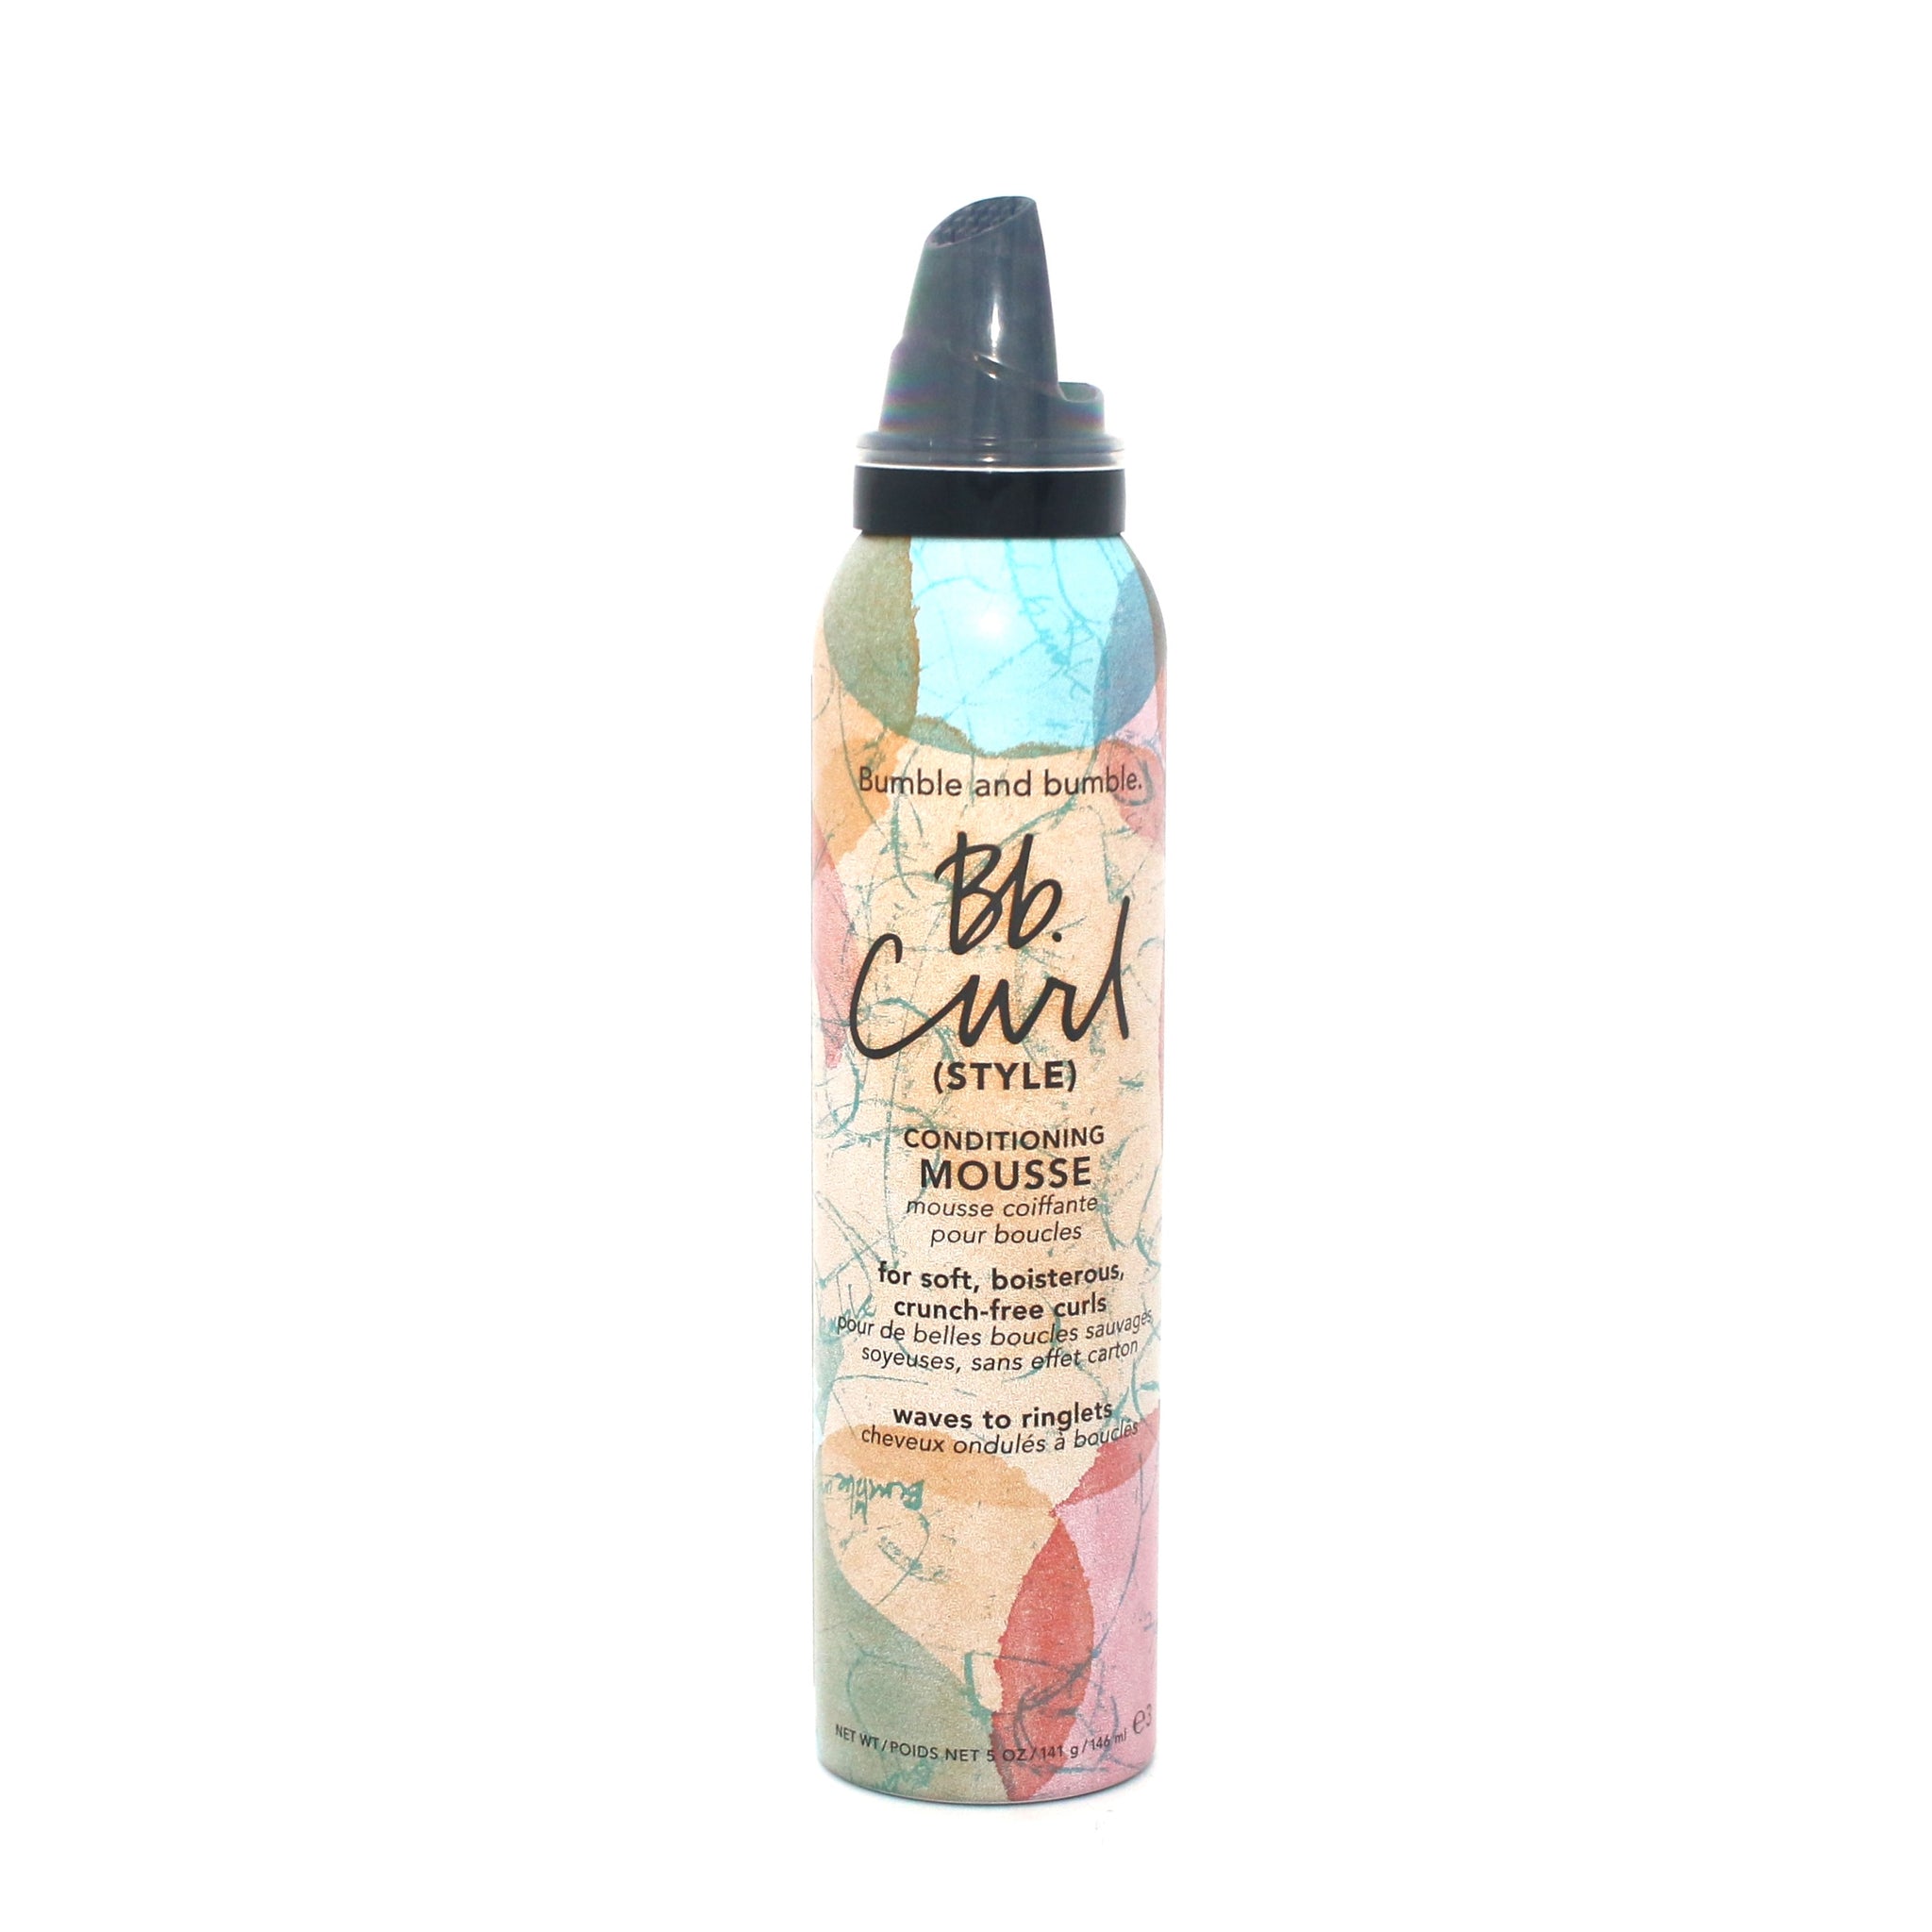 Bumble and Bumble Bb Curl (Style) Conditioning Mousse 5 oz